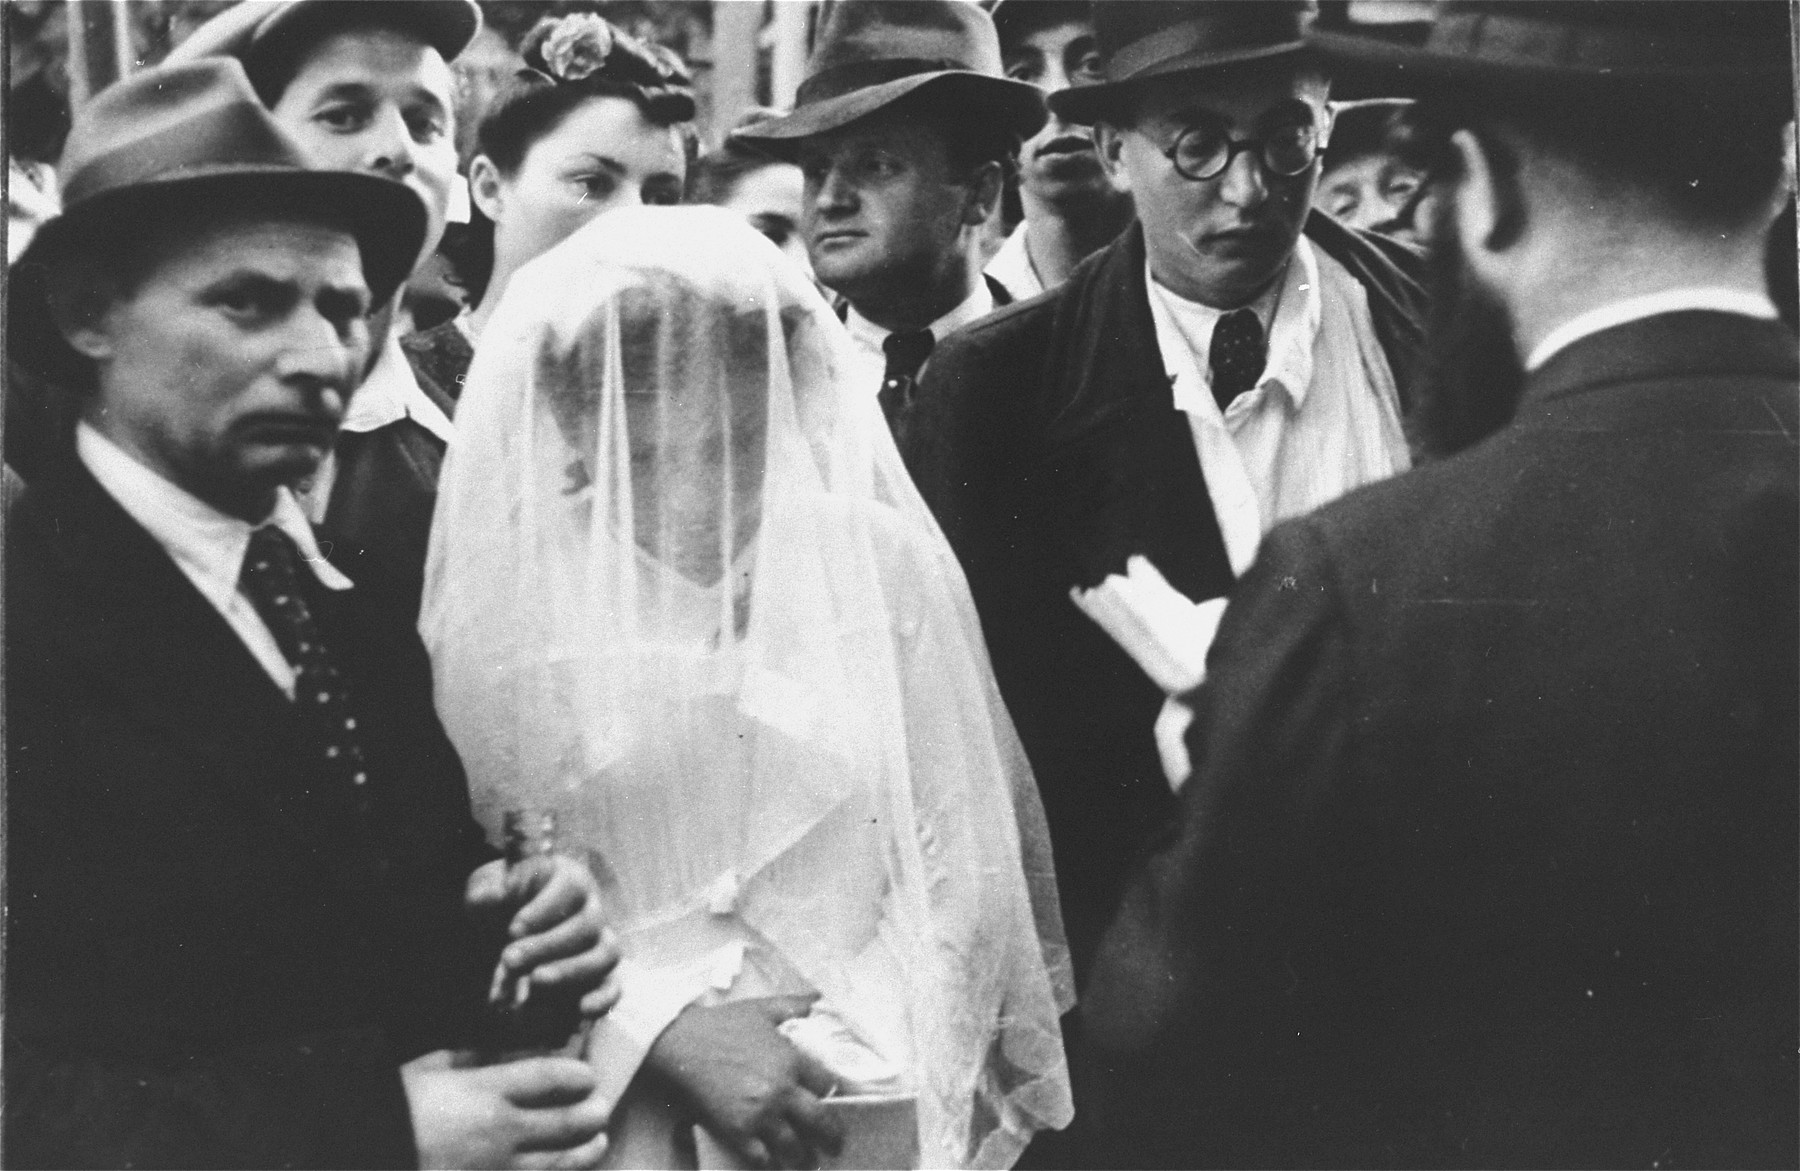 Wedding ceremony at the Zeilsheim displaced persons' camp.  The rabbi recites the marriage blessings under the huppah (canopy).